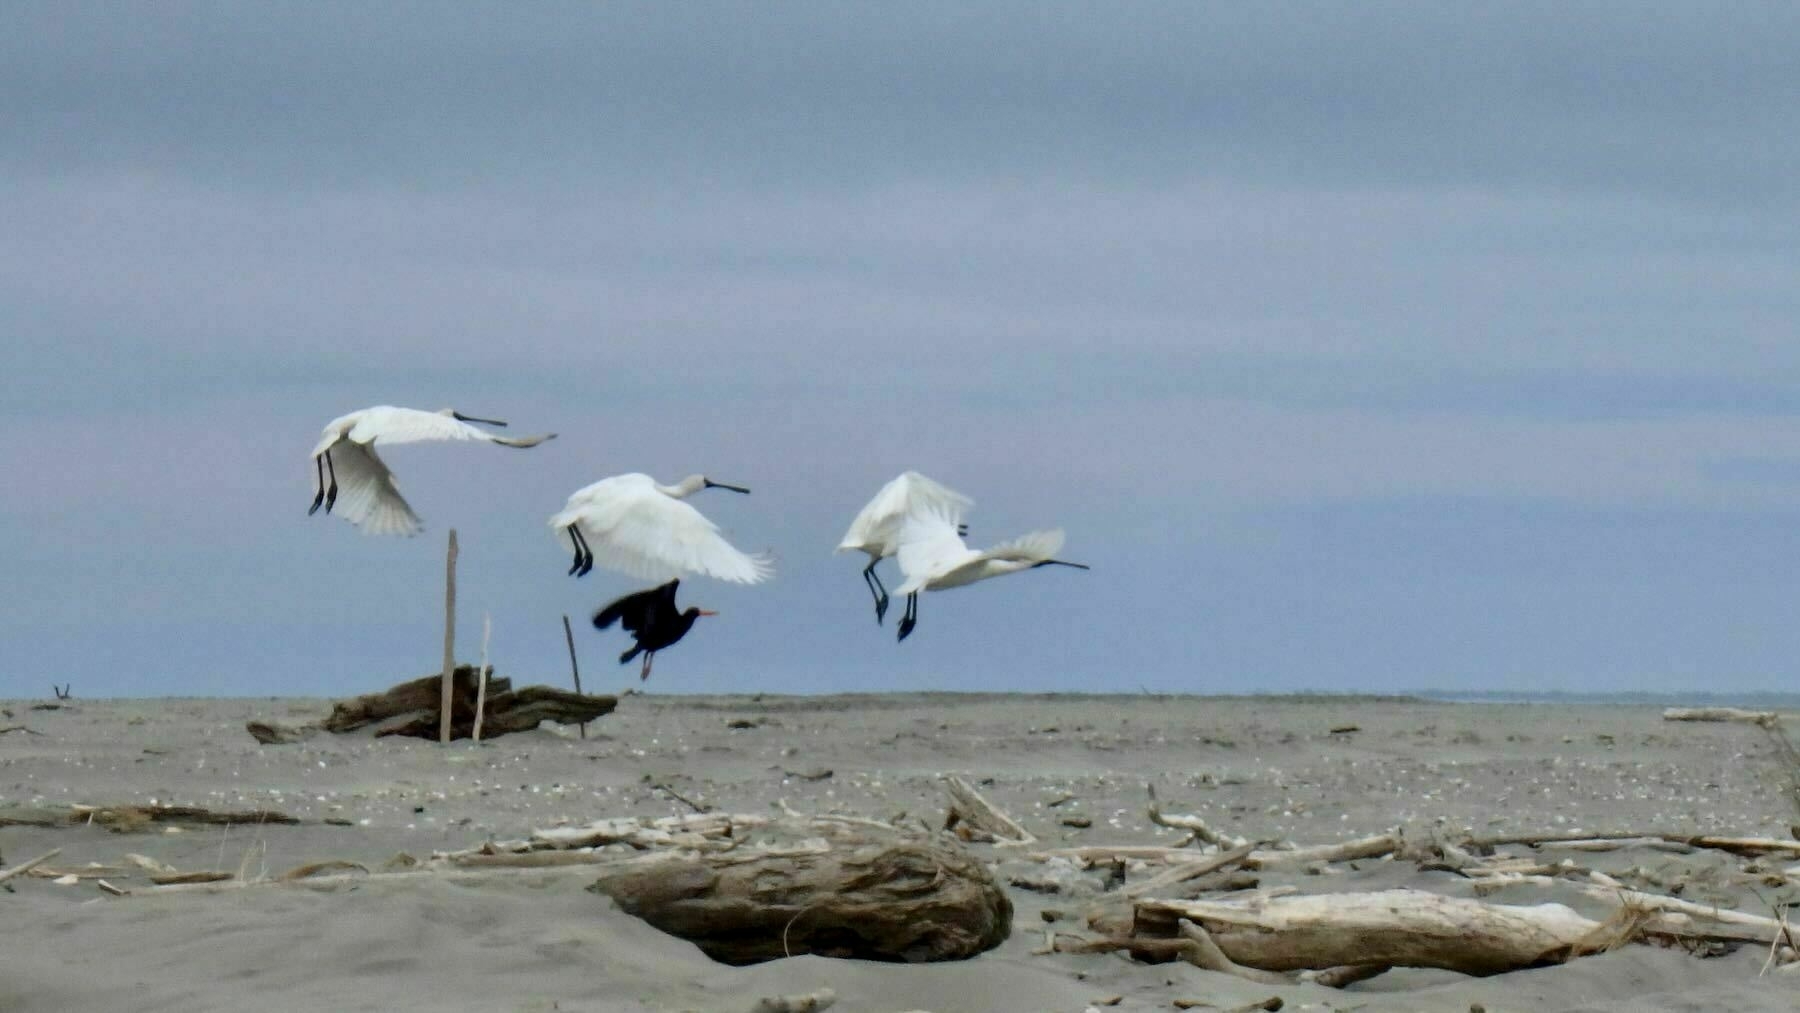 4 large white birds and a small black bird in flight just above the sand. 